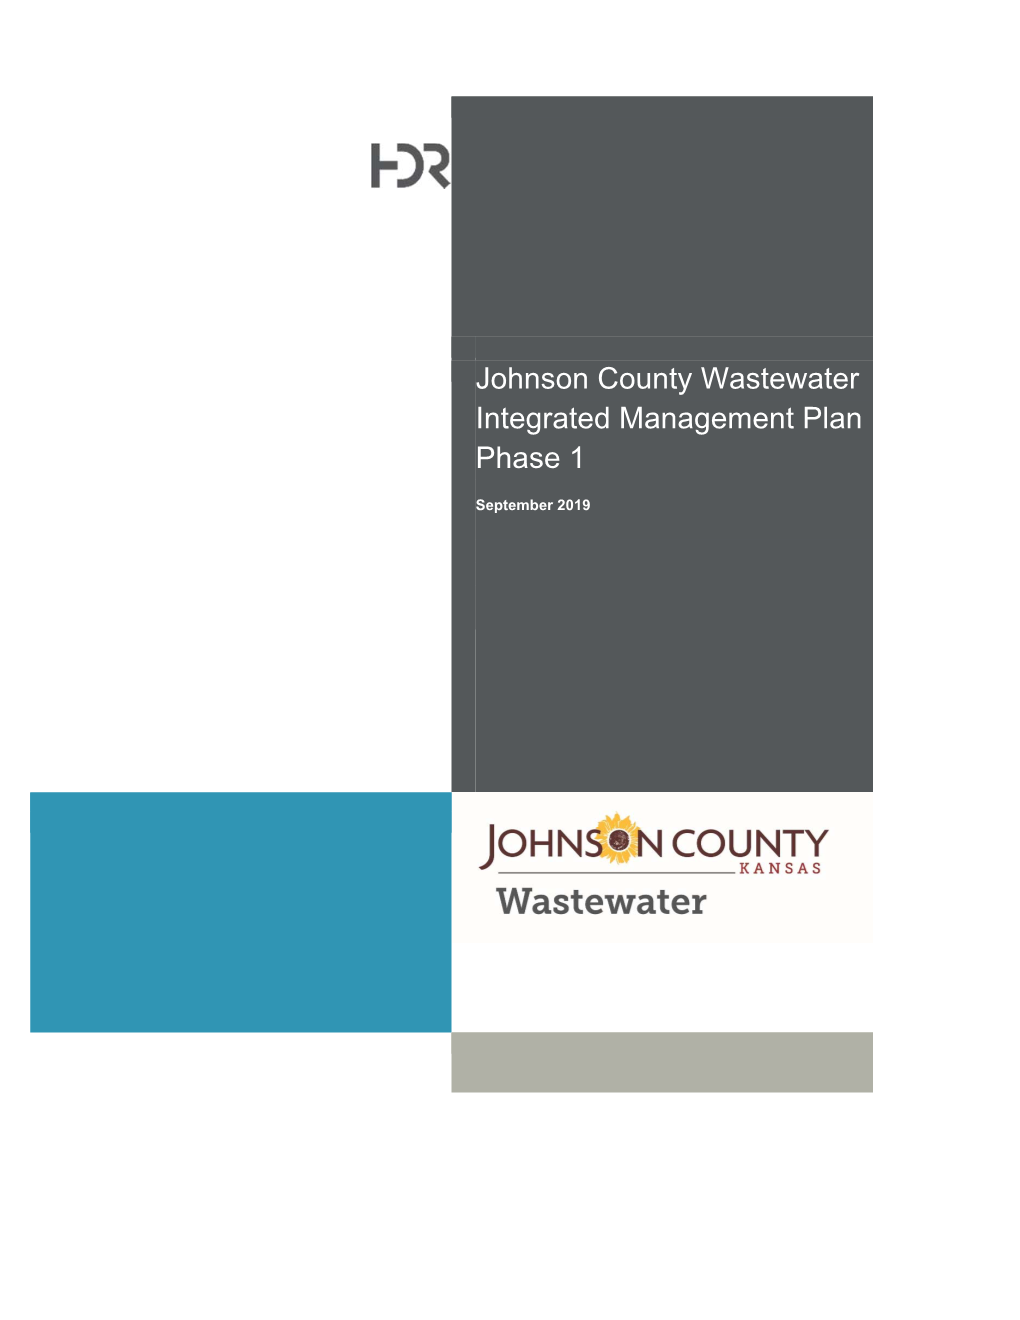 Johnson County Wastewater Integrated Management Plan Phase 1